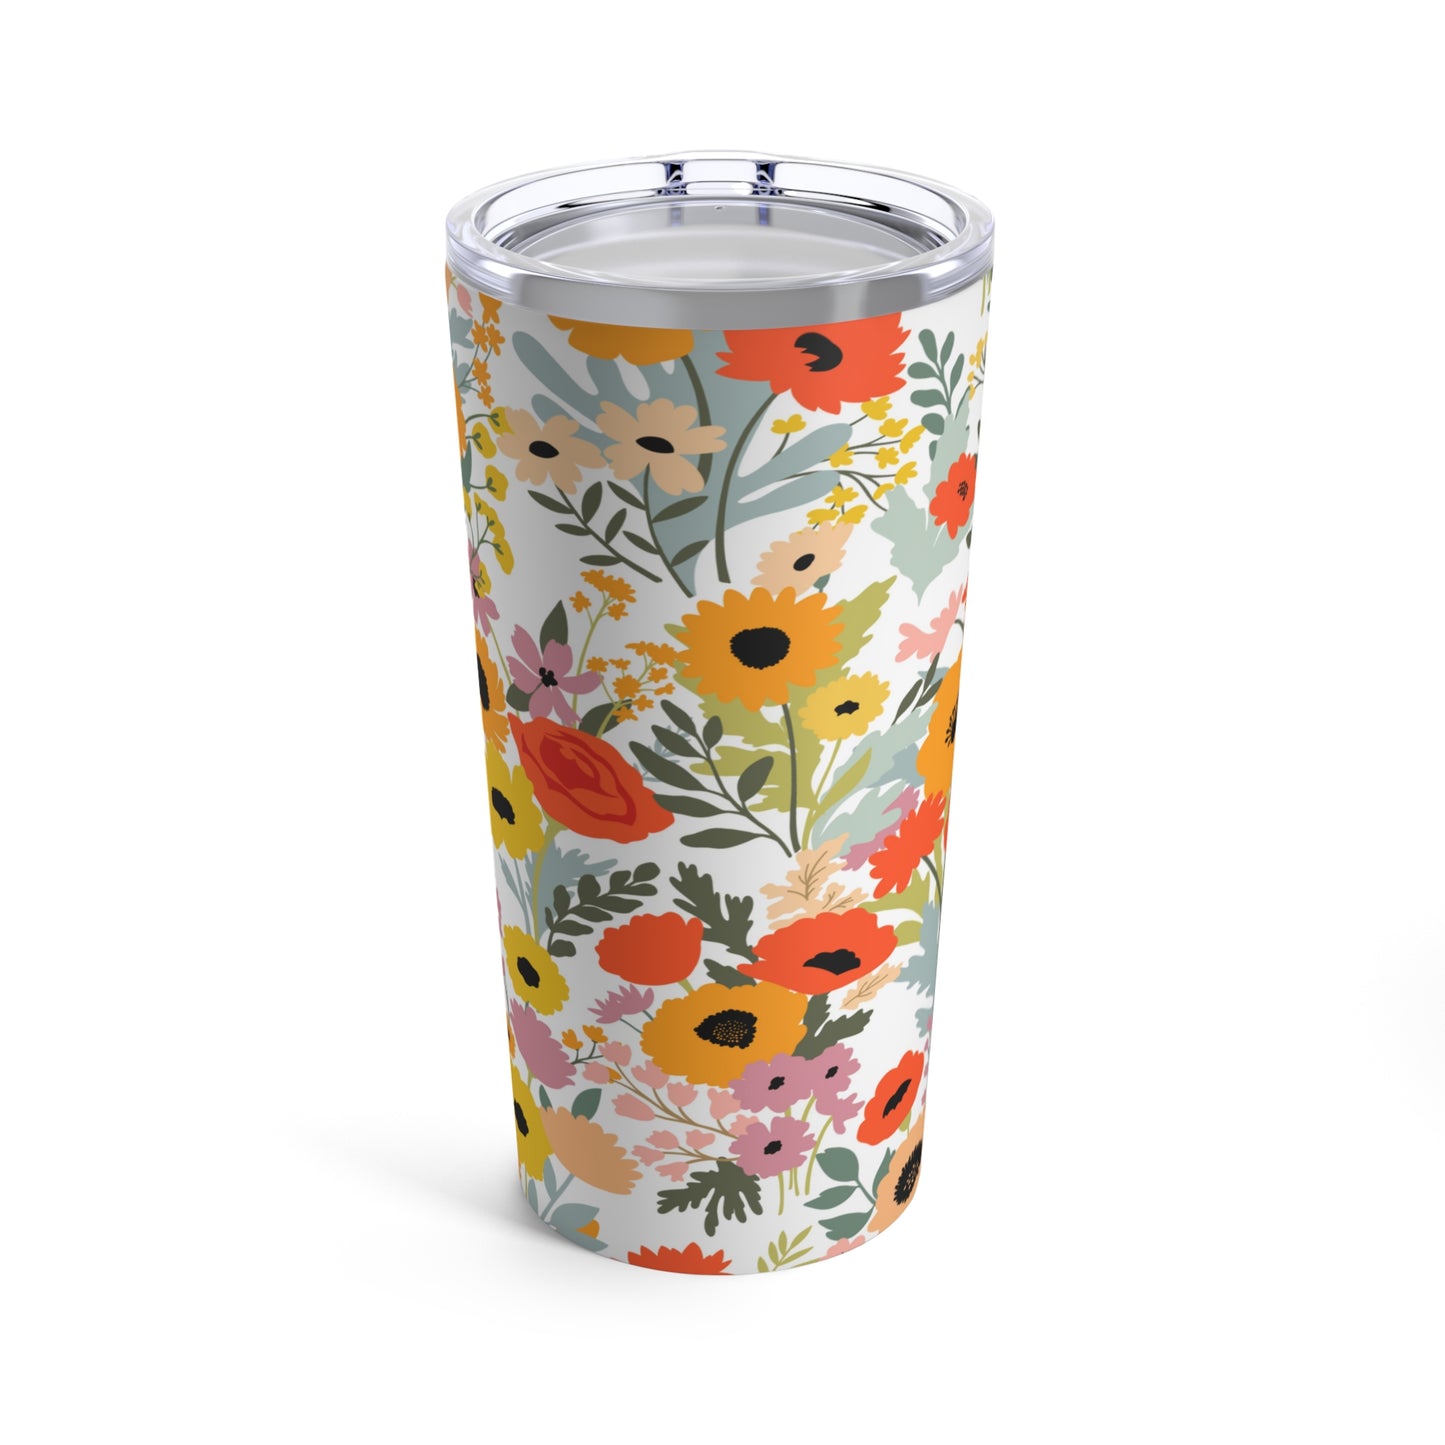 A Printify Summer Flowers Tumbler: 20 oz.; Stainless steel; Insulated